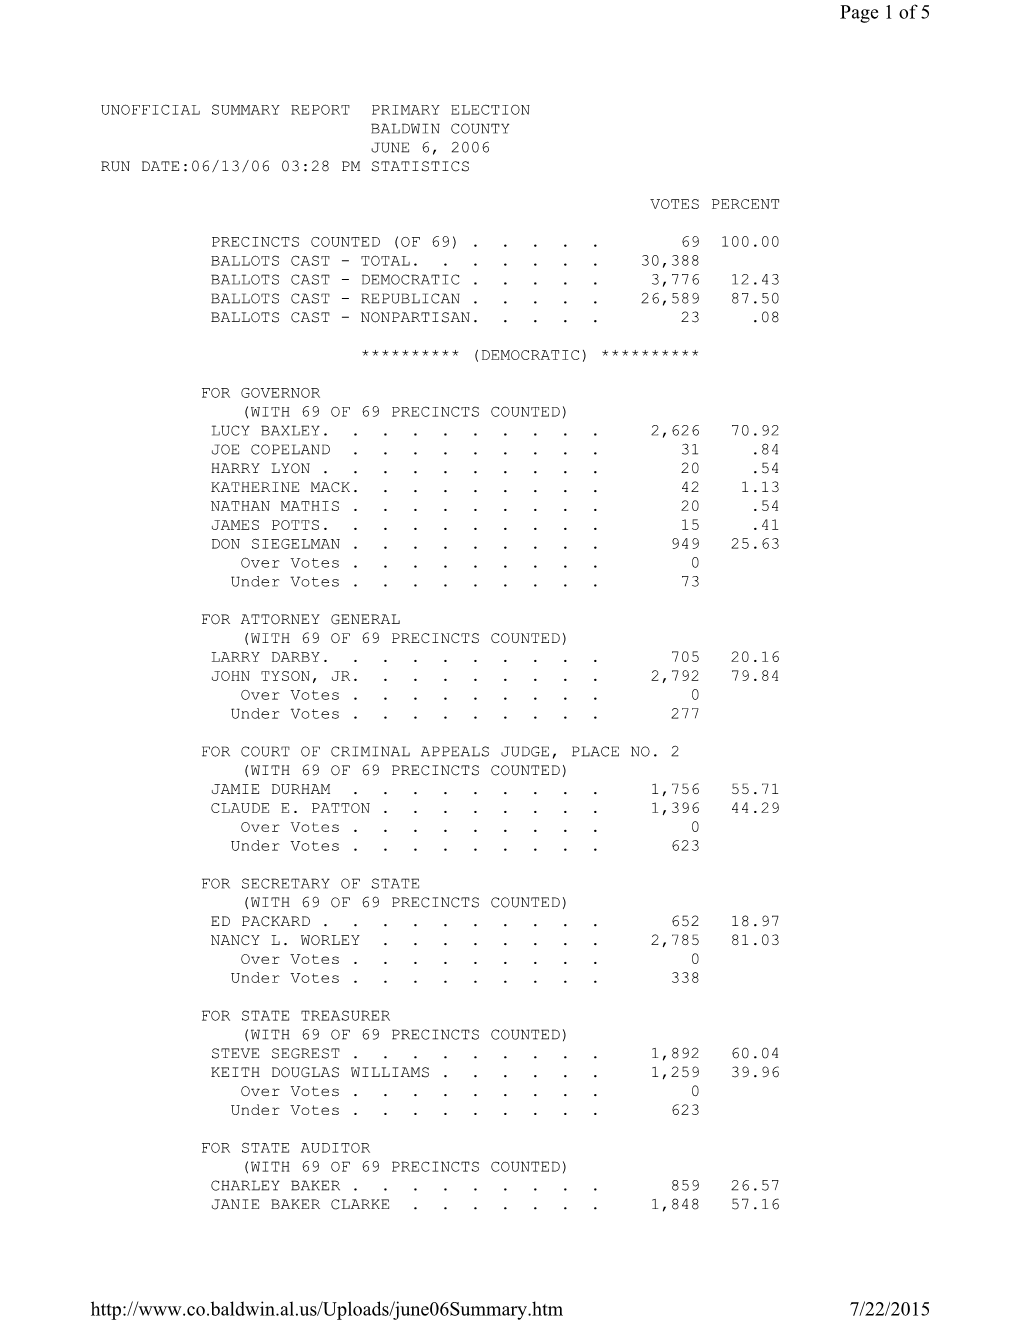 Download2006 Primary Election Results by Precinct Cumulative by Offices and Amendments